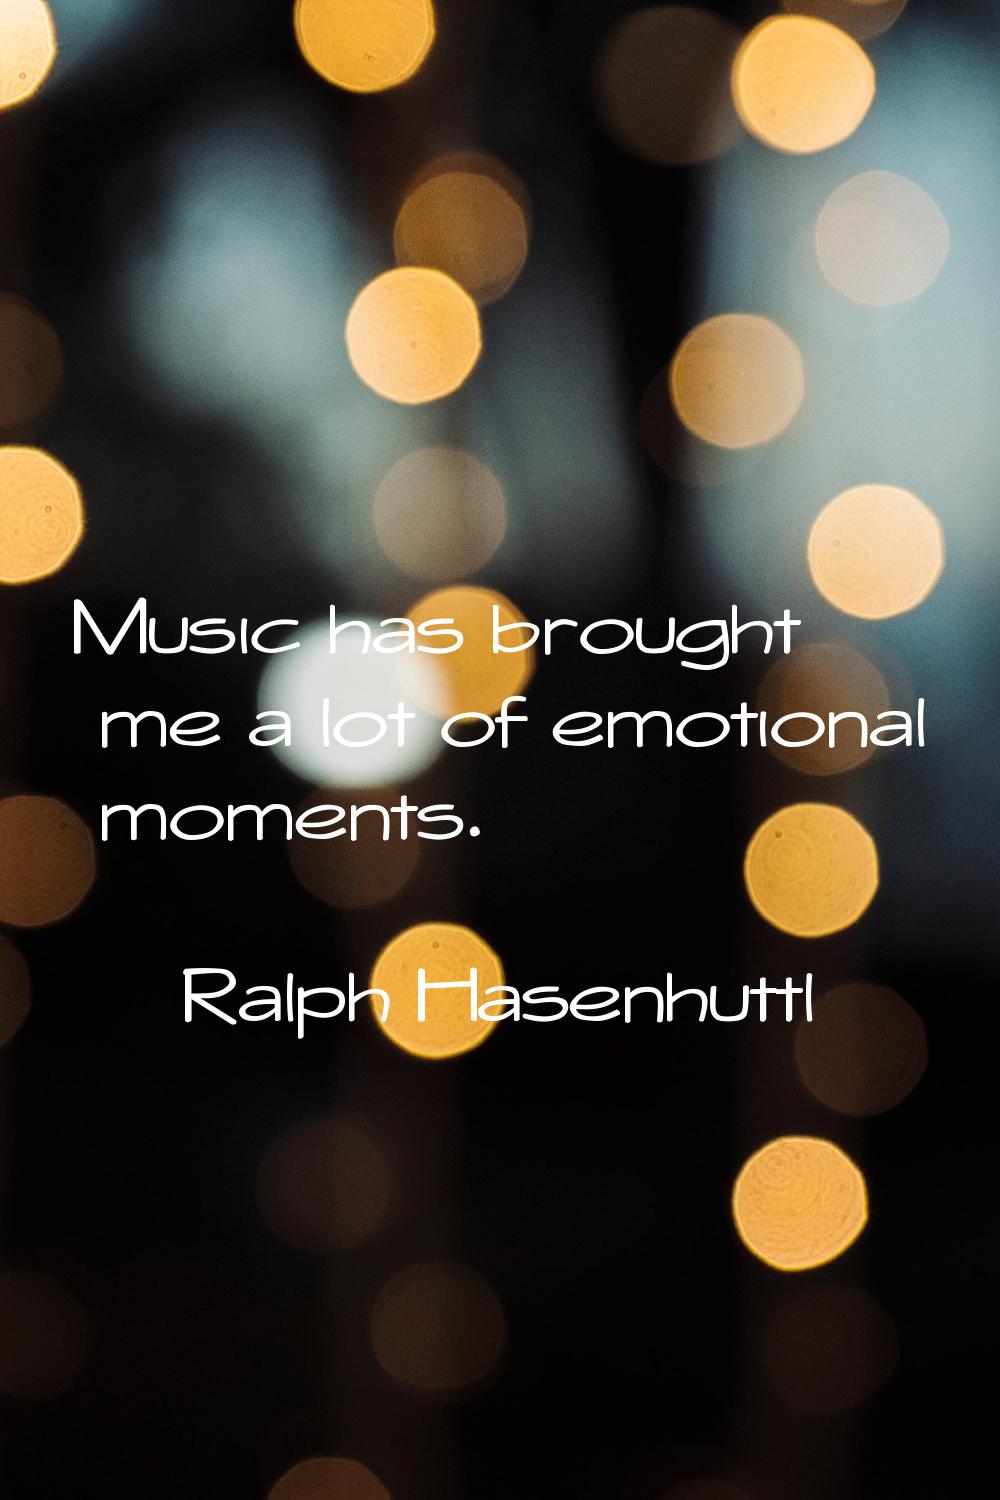 Music has brought me a lot of emotional moments.